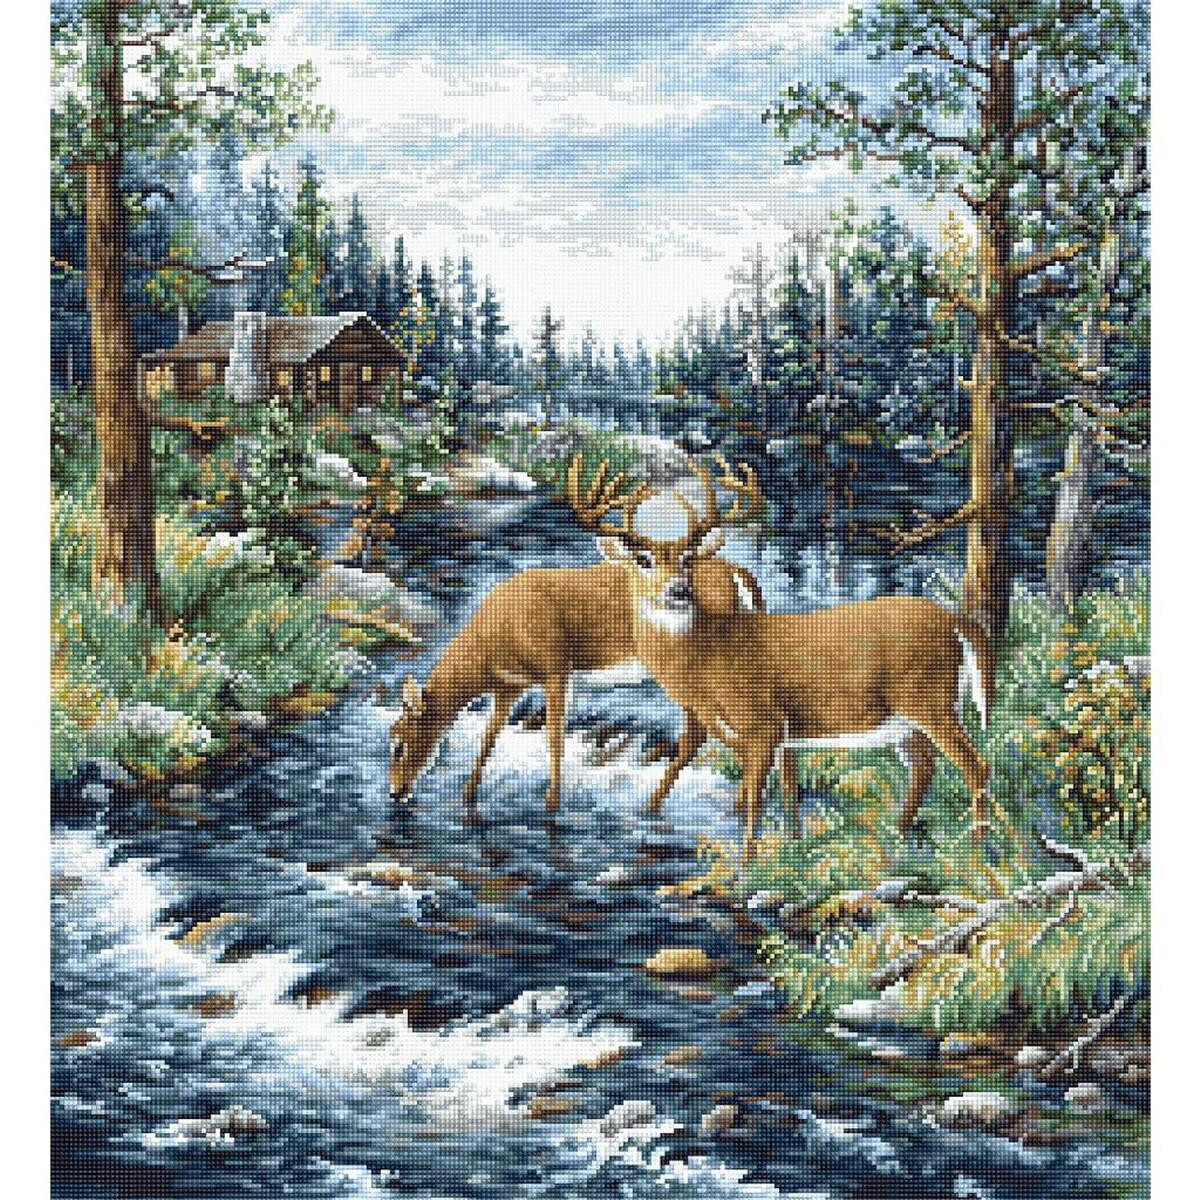 Pixel art image of two deer standing in a shallow stream...